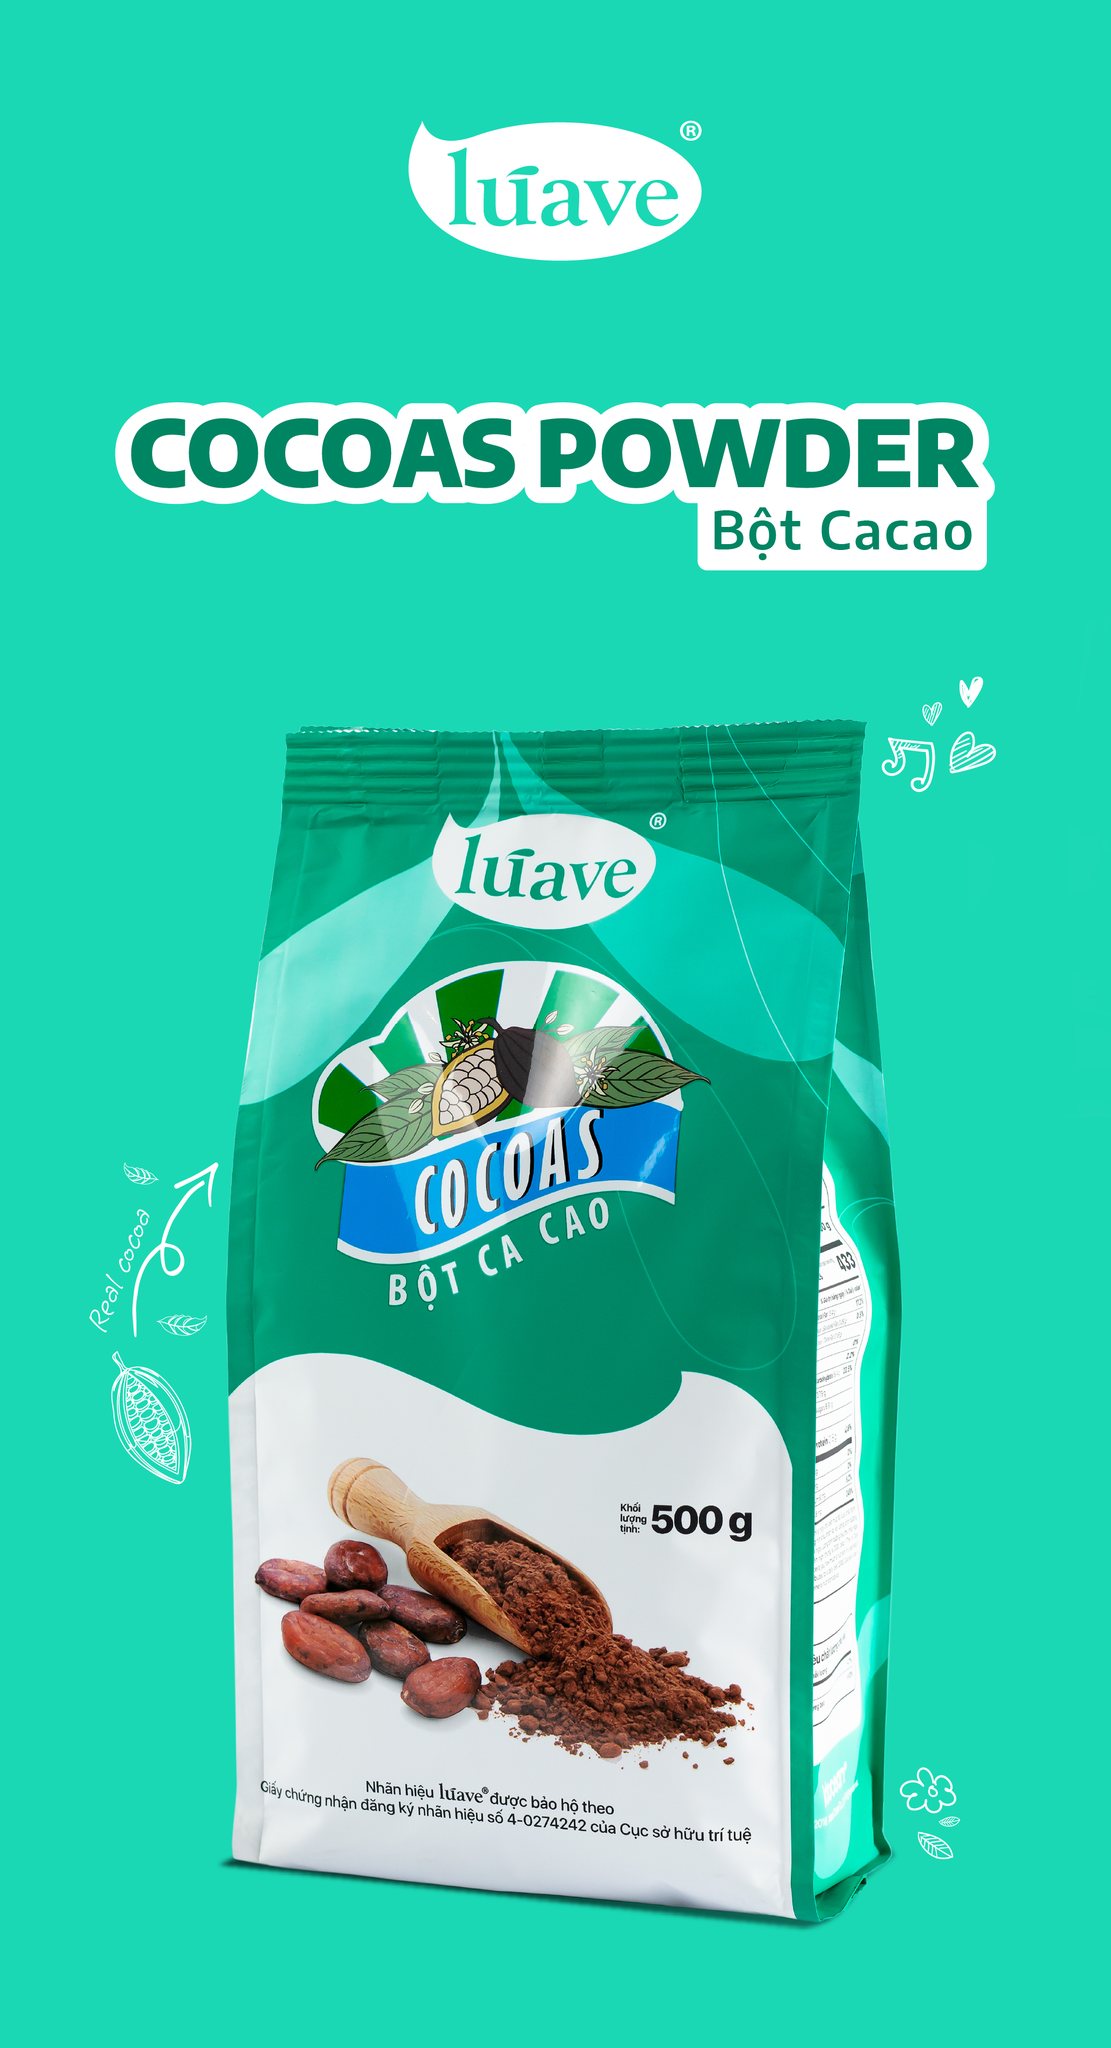 Bột cacao Lúave 500g